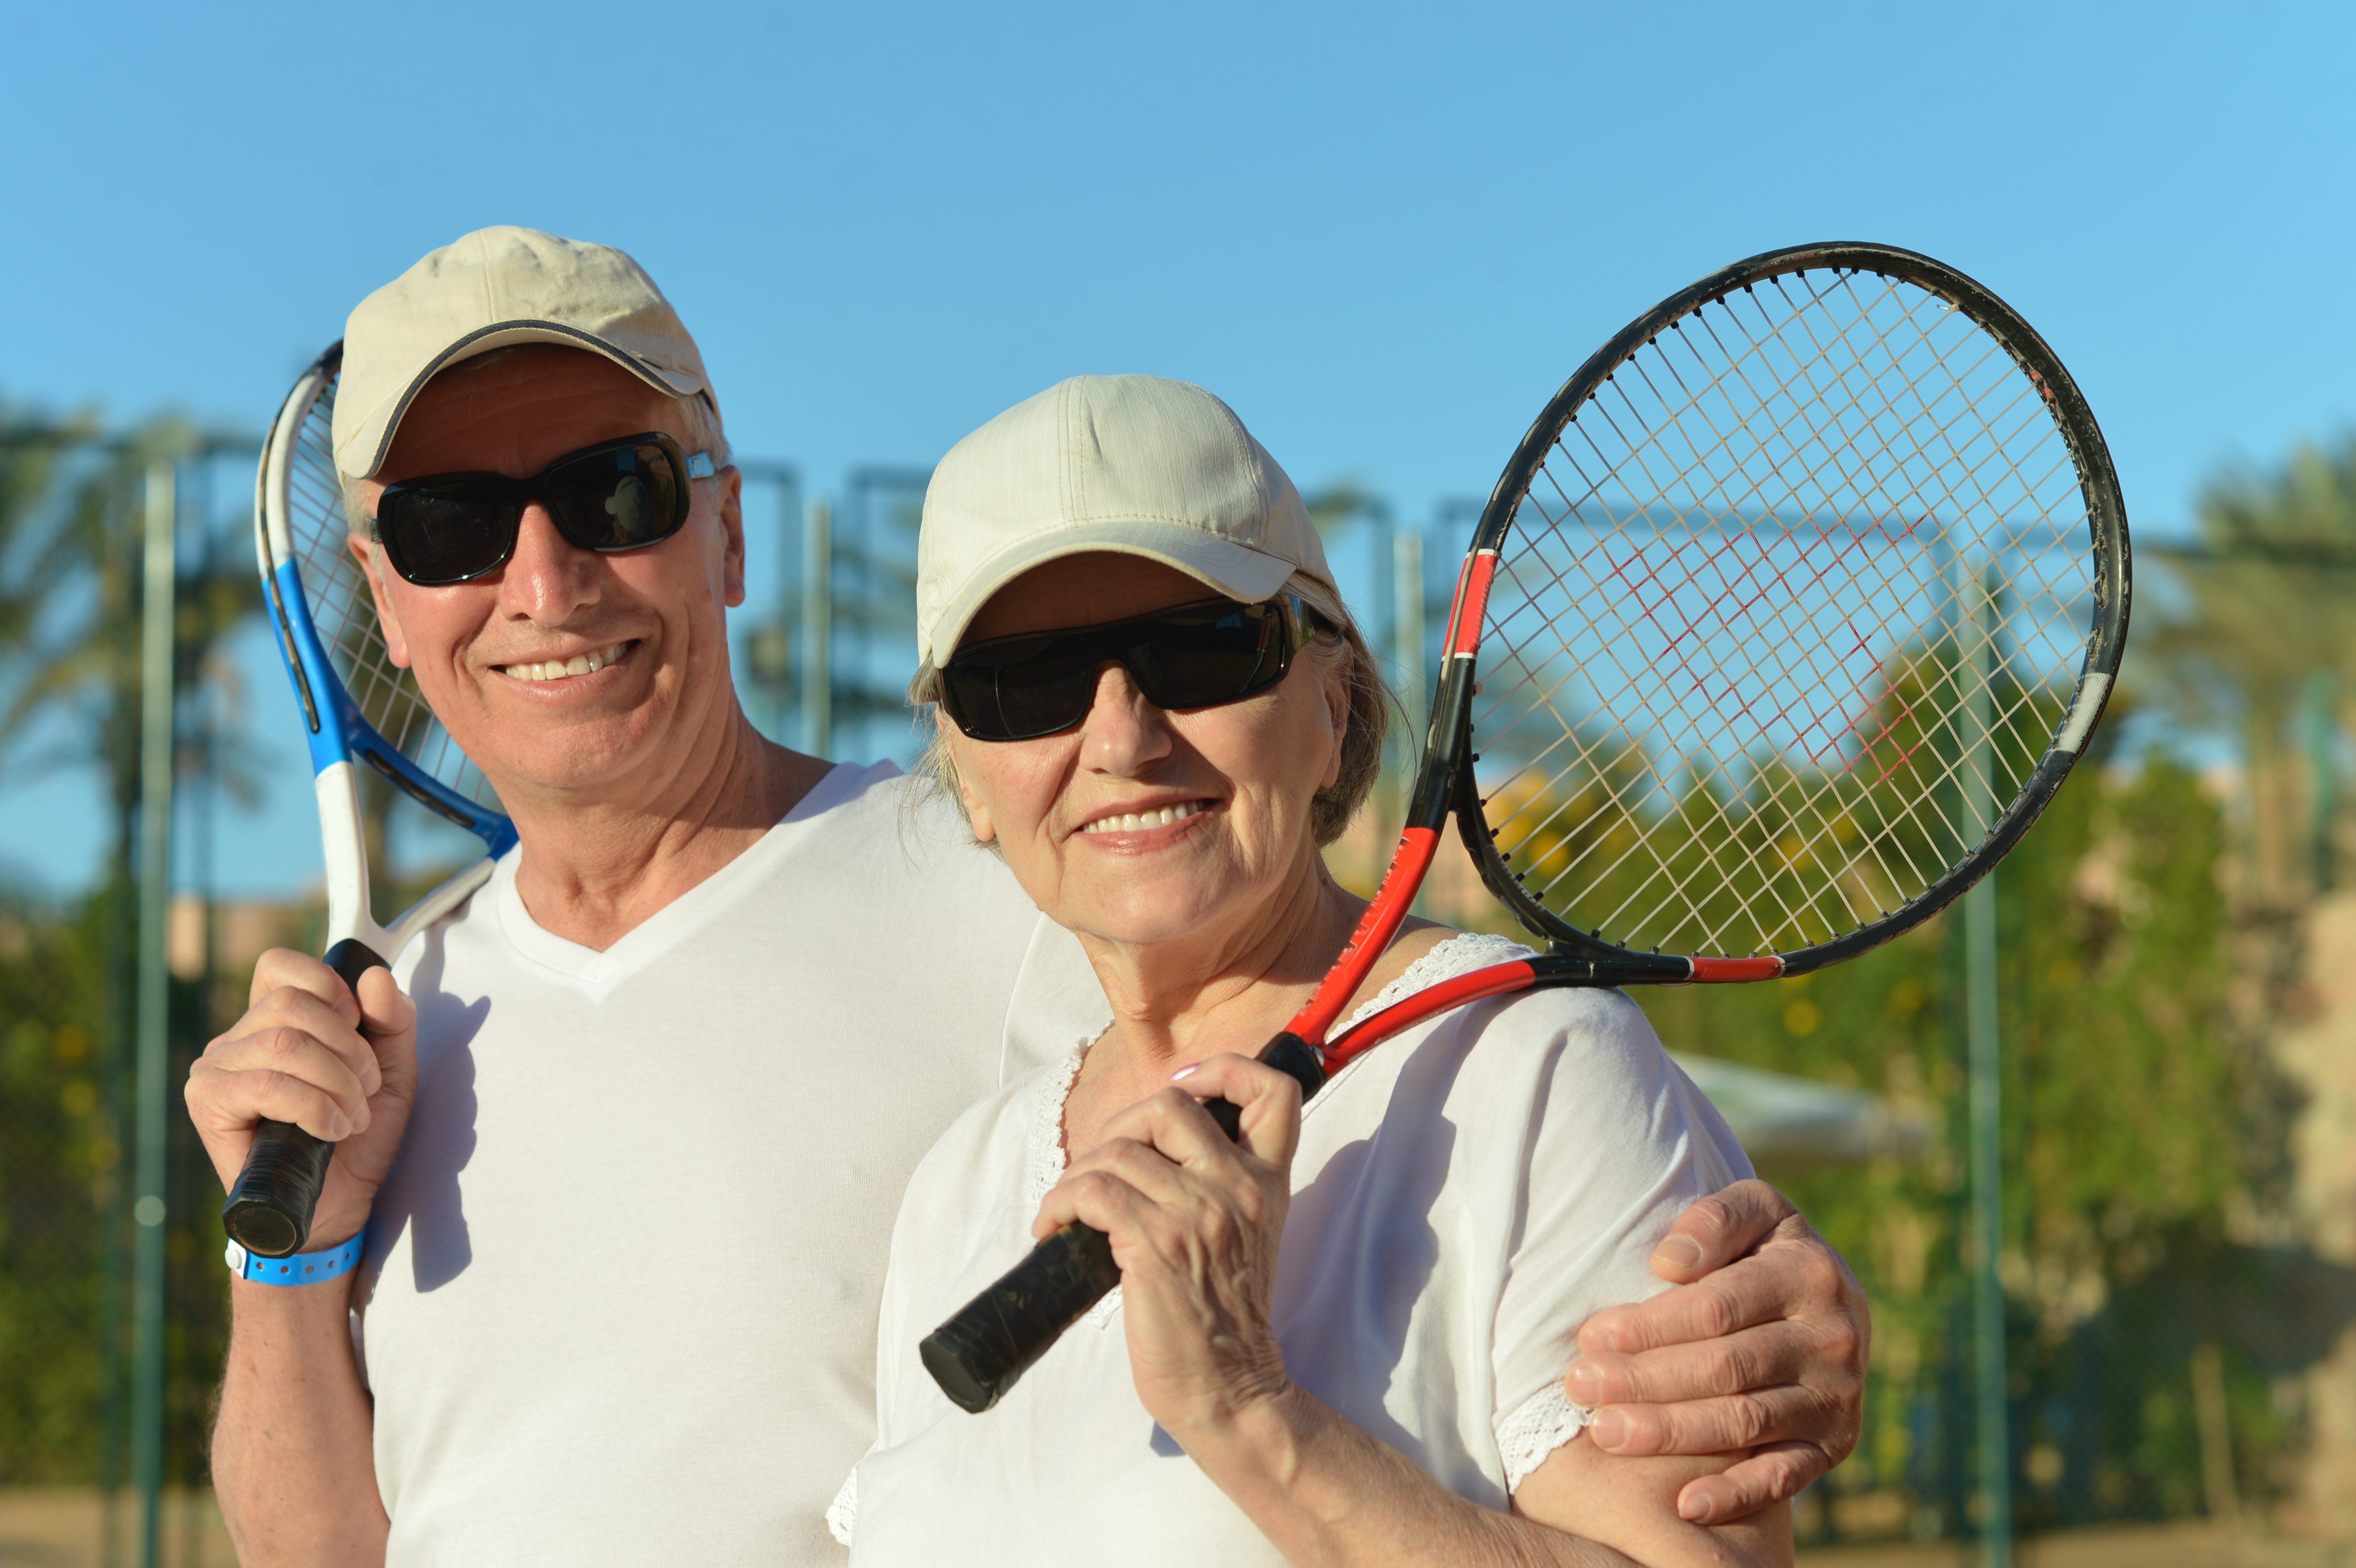 A smiling, happy couple wearing sunglasses rests between sets with tennis rackets in hand.